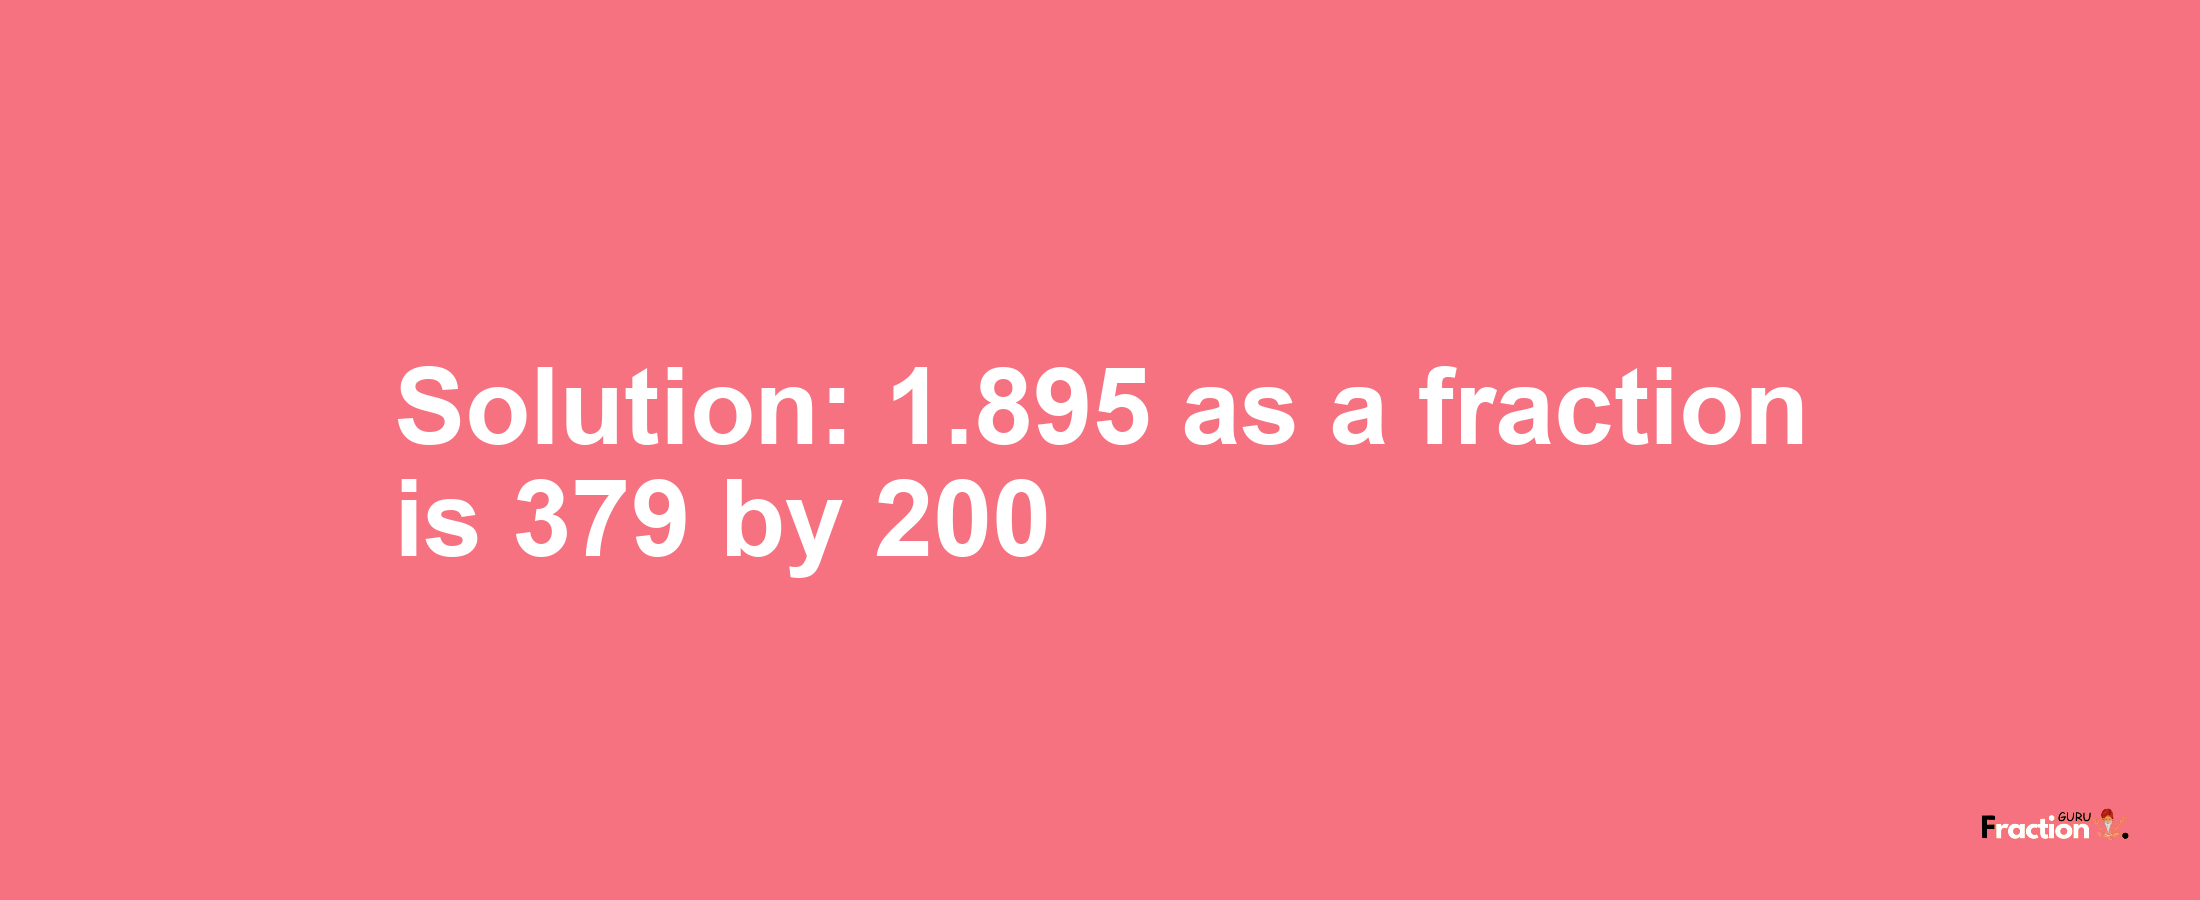 Solution:1.895 as a fraction is 379/200